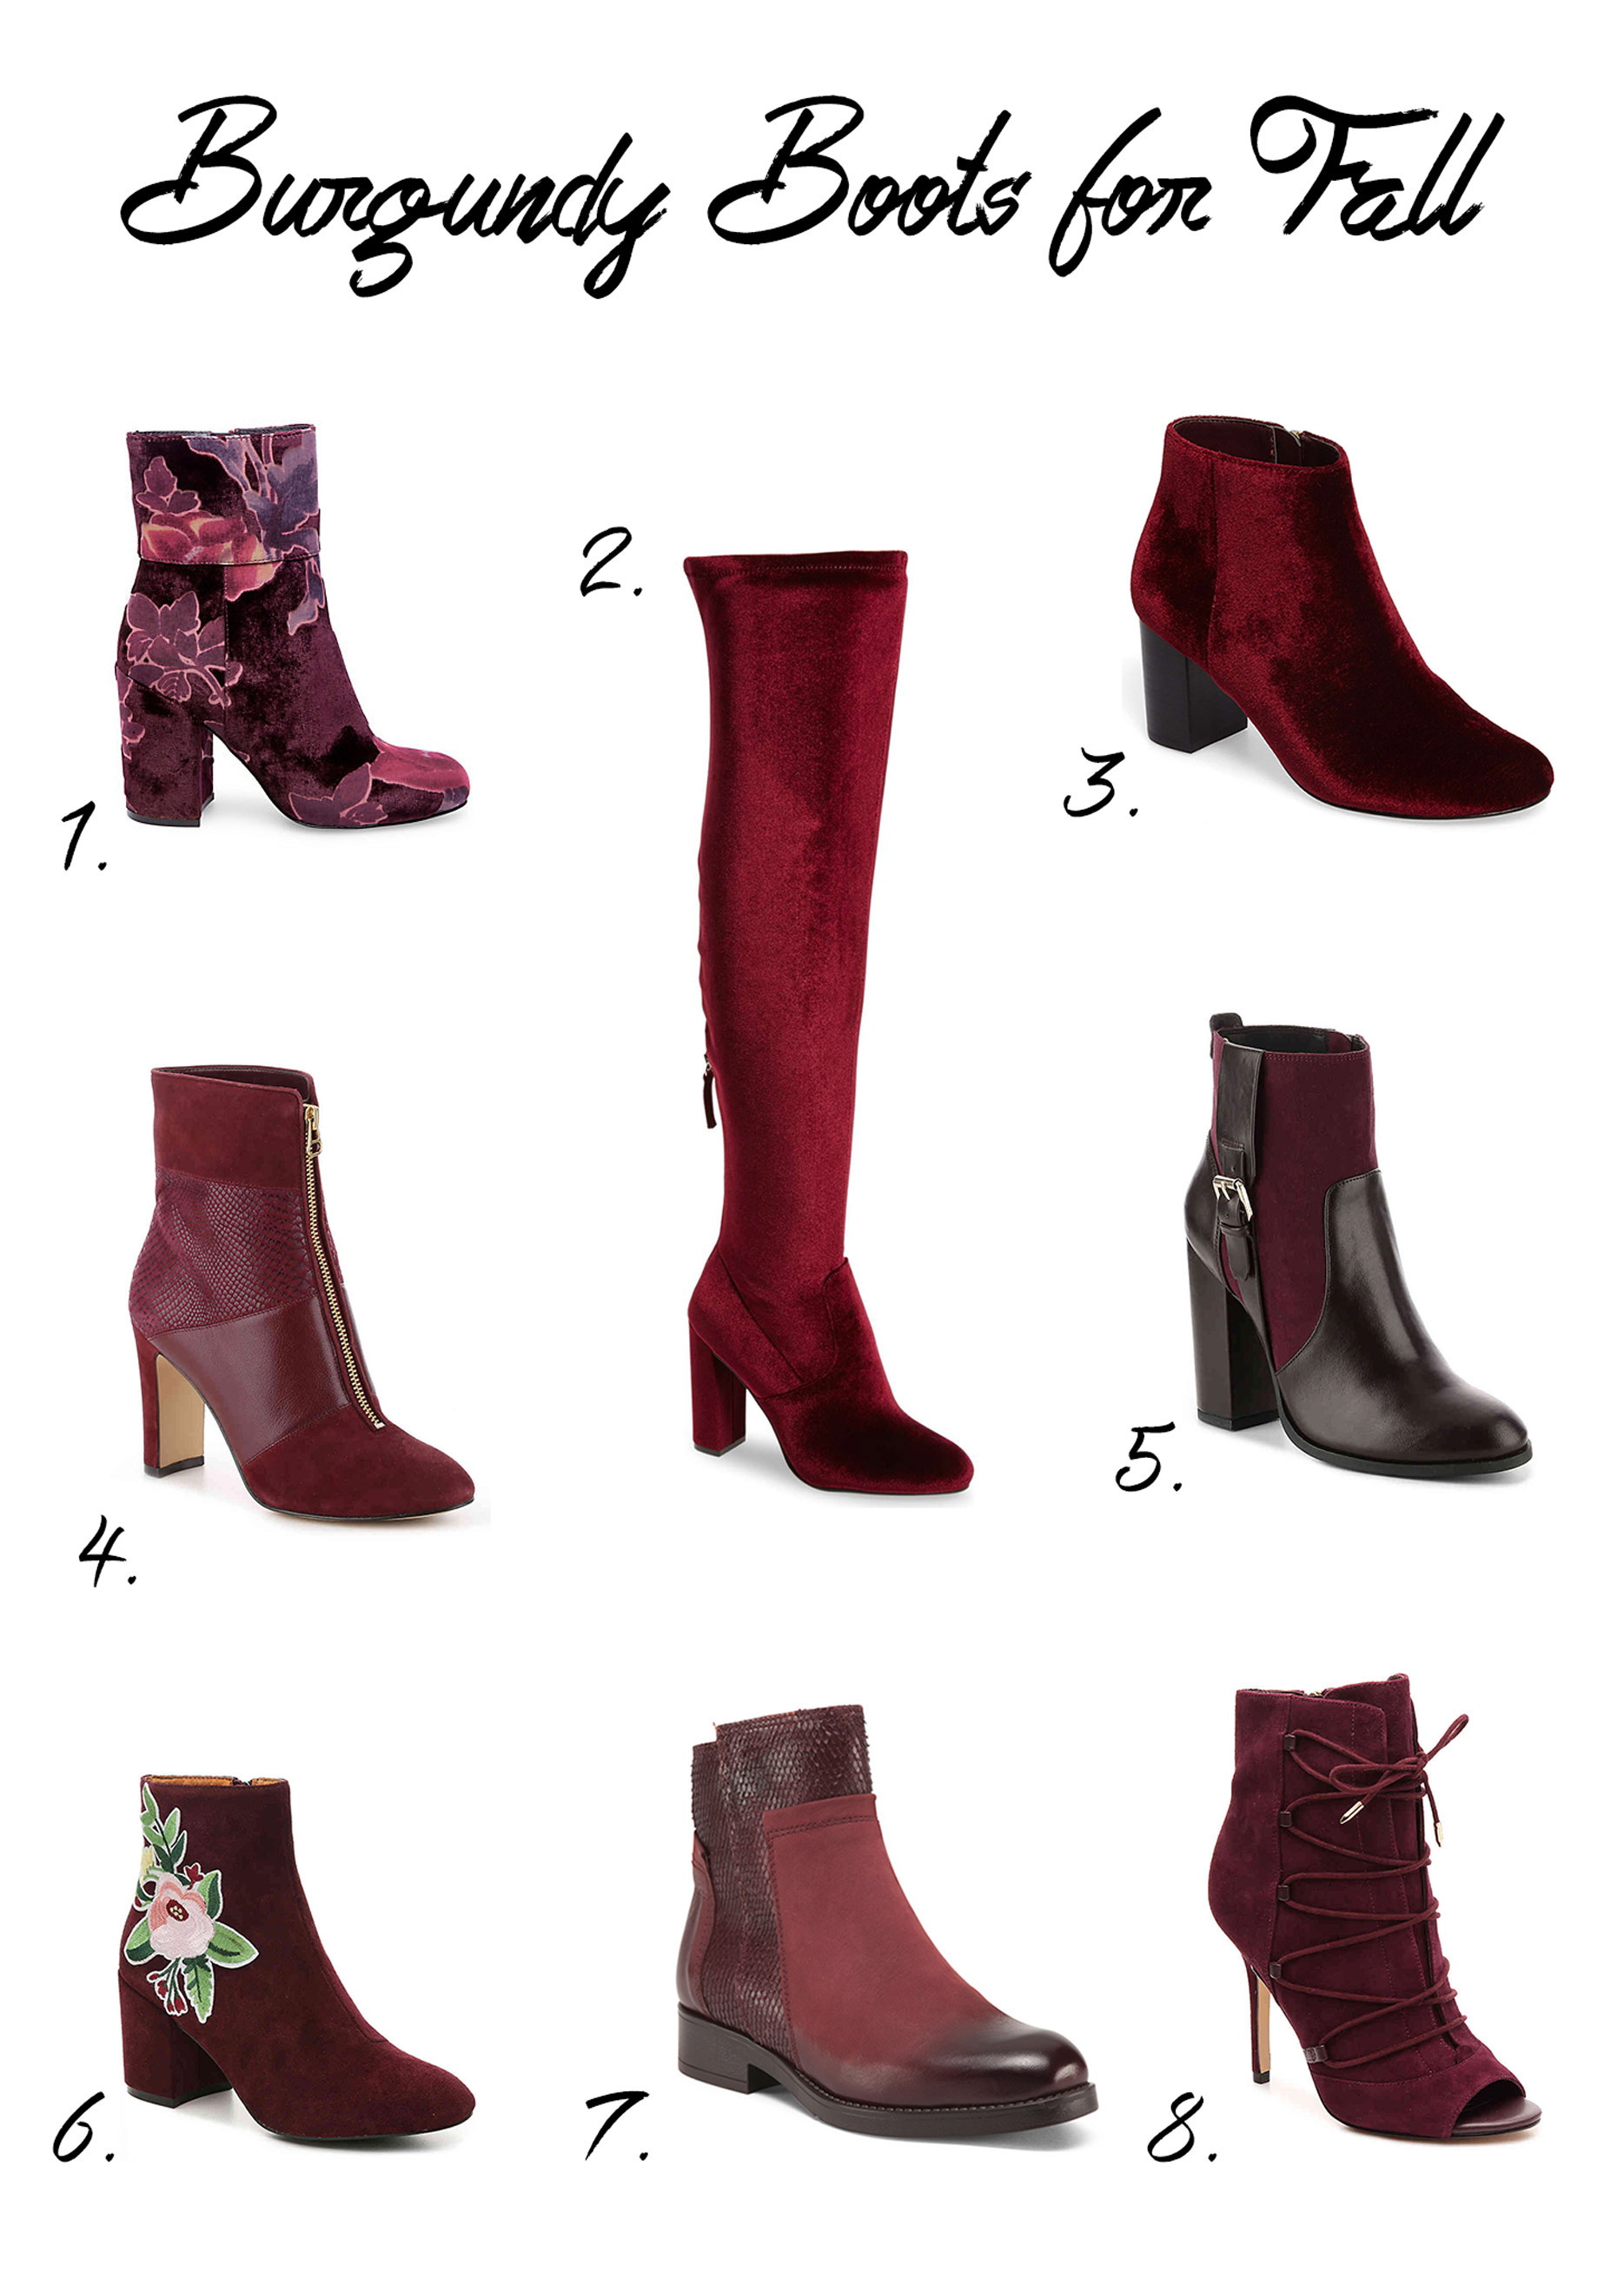 Burgundy Boots for Fall